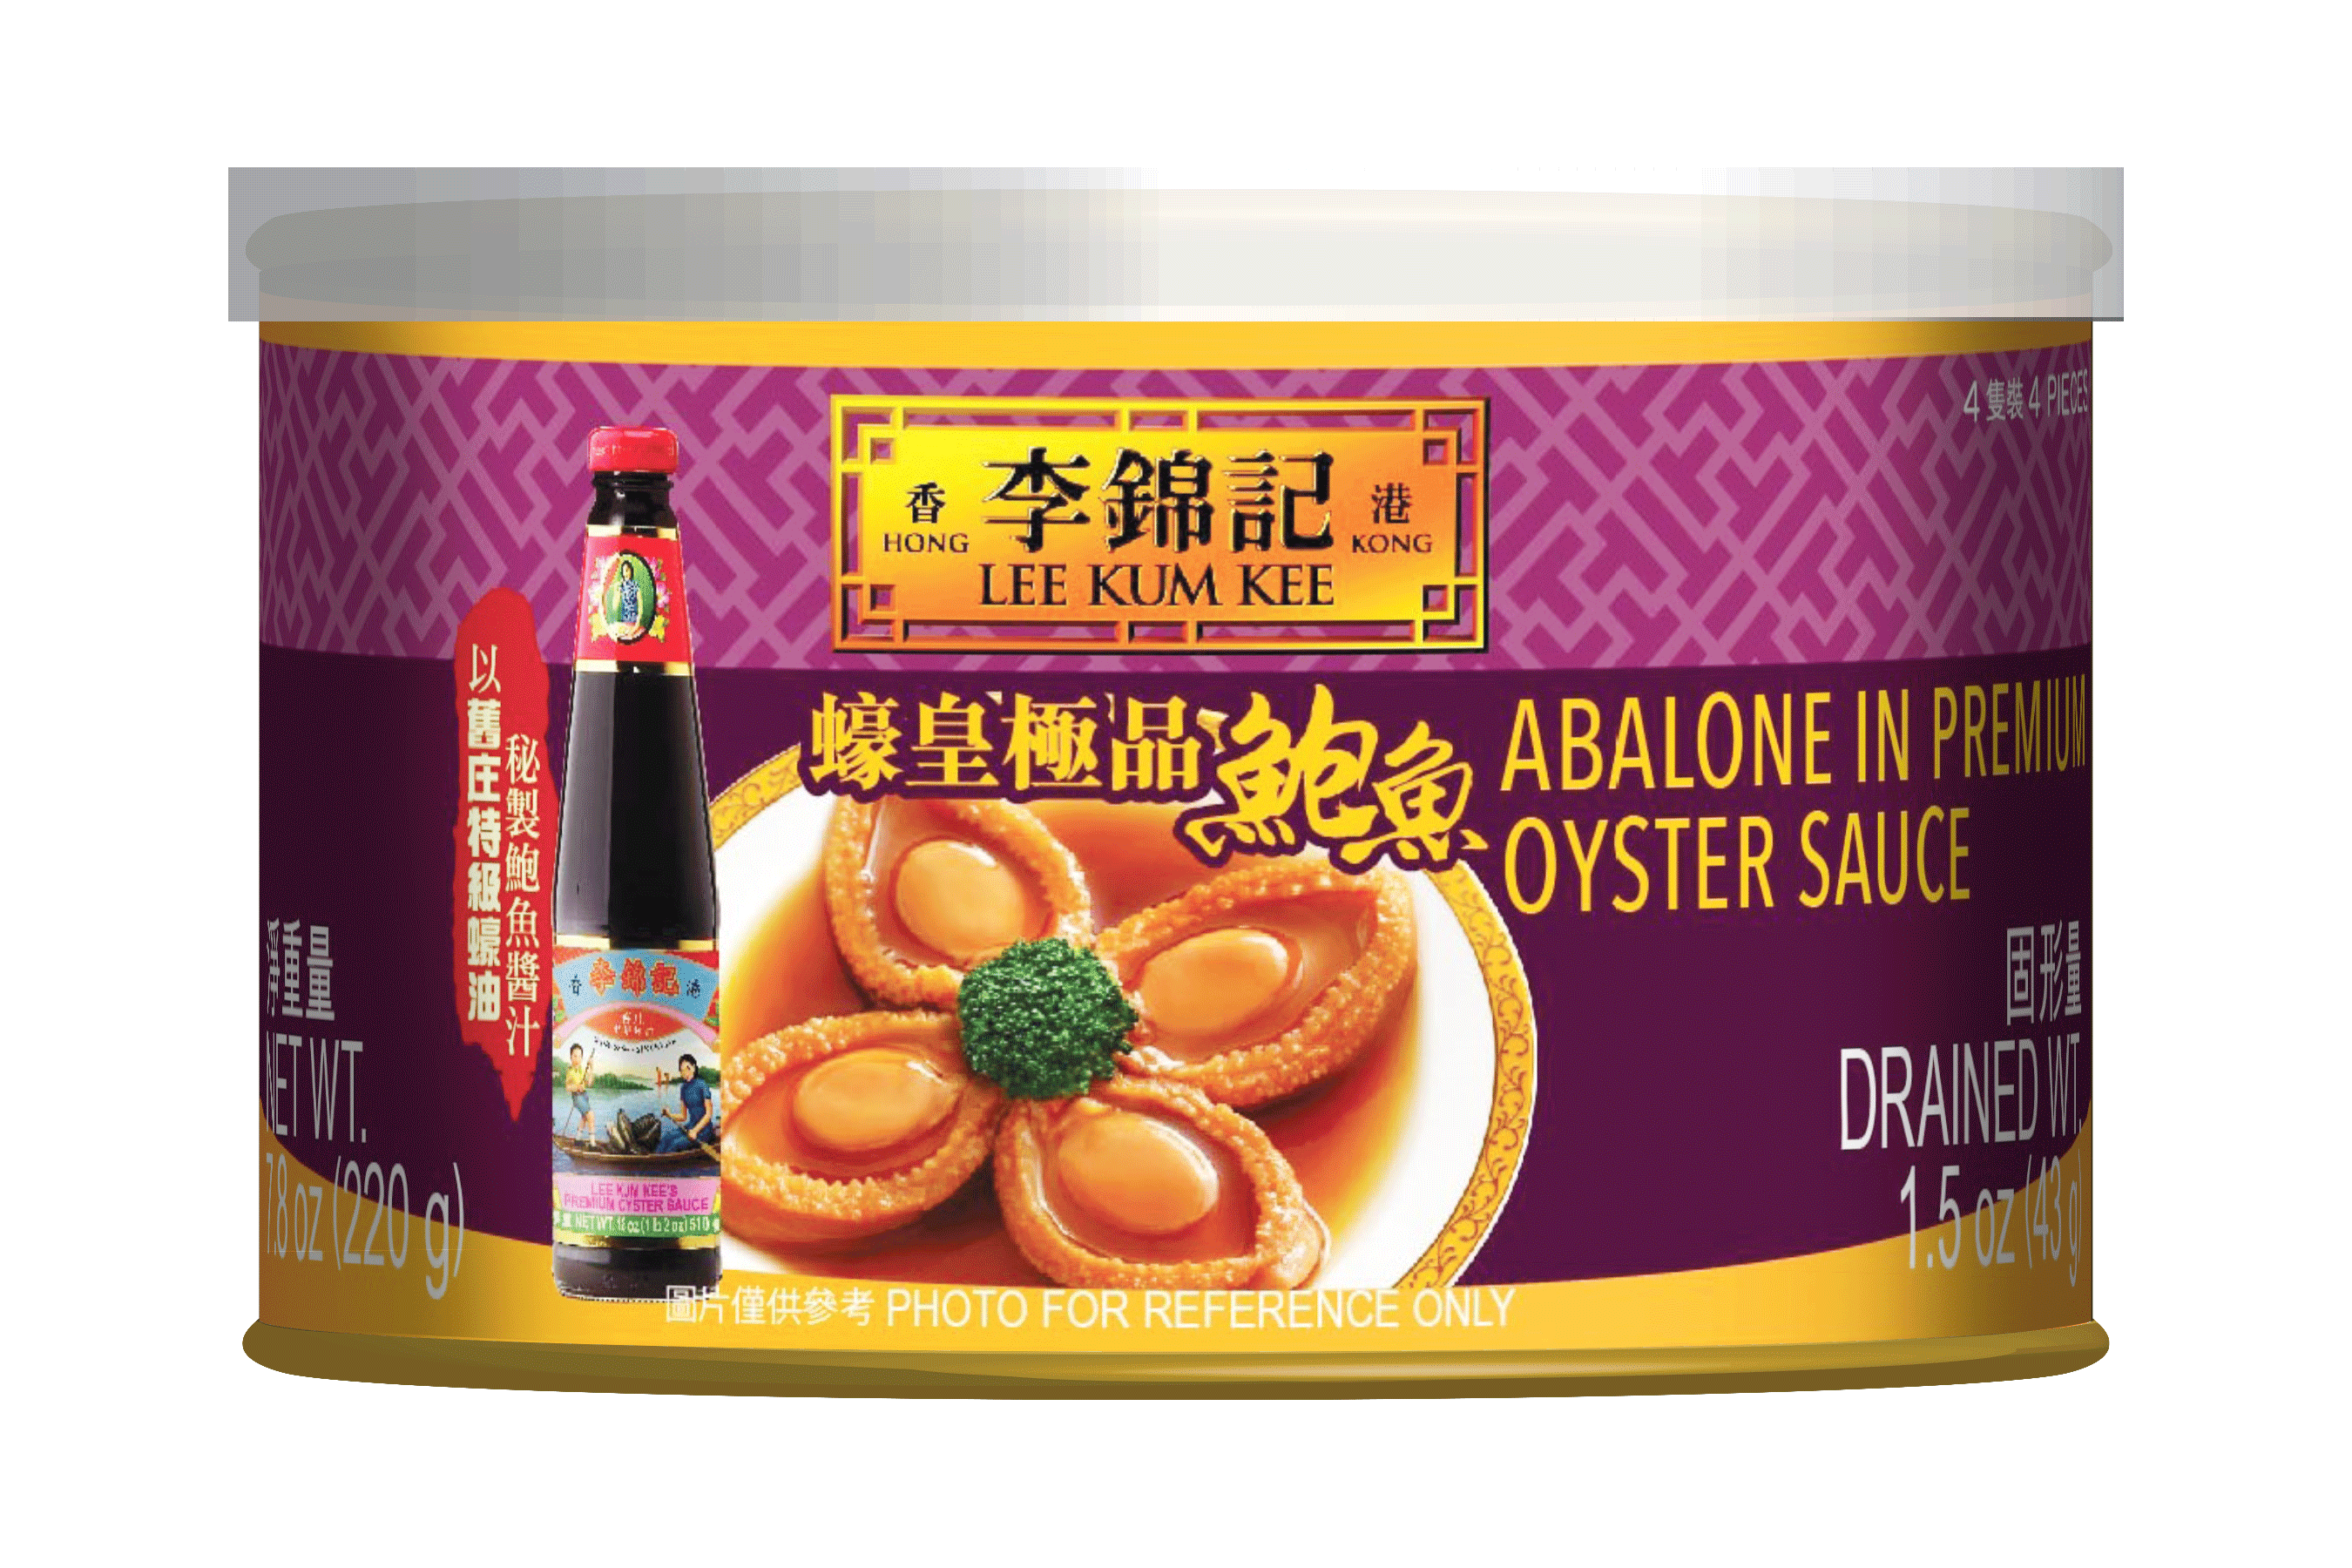 Abalone in Premium Oyster Sauce 7.8 oz (220 g)